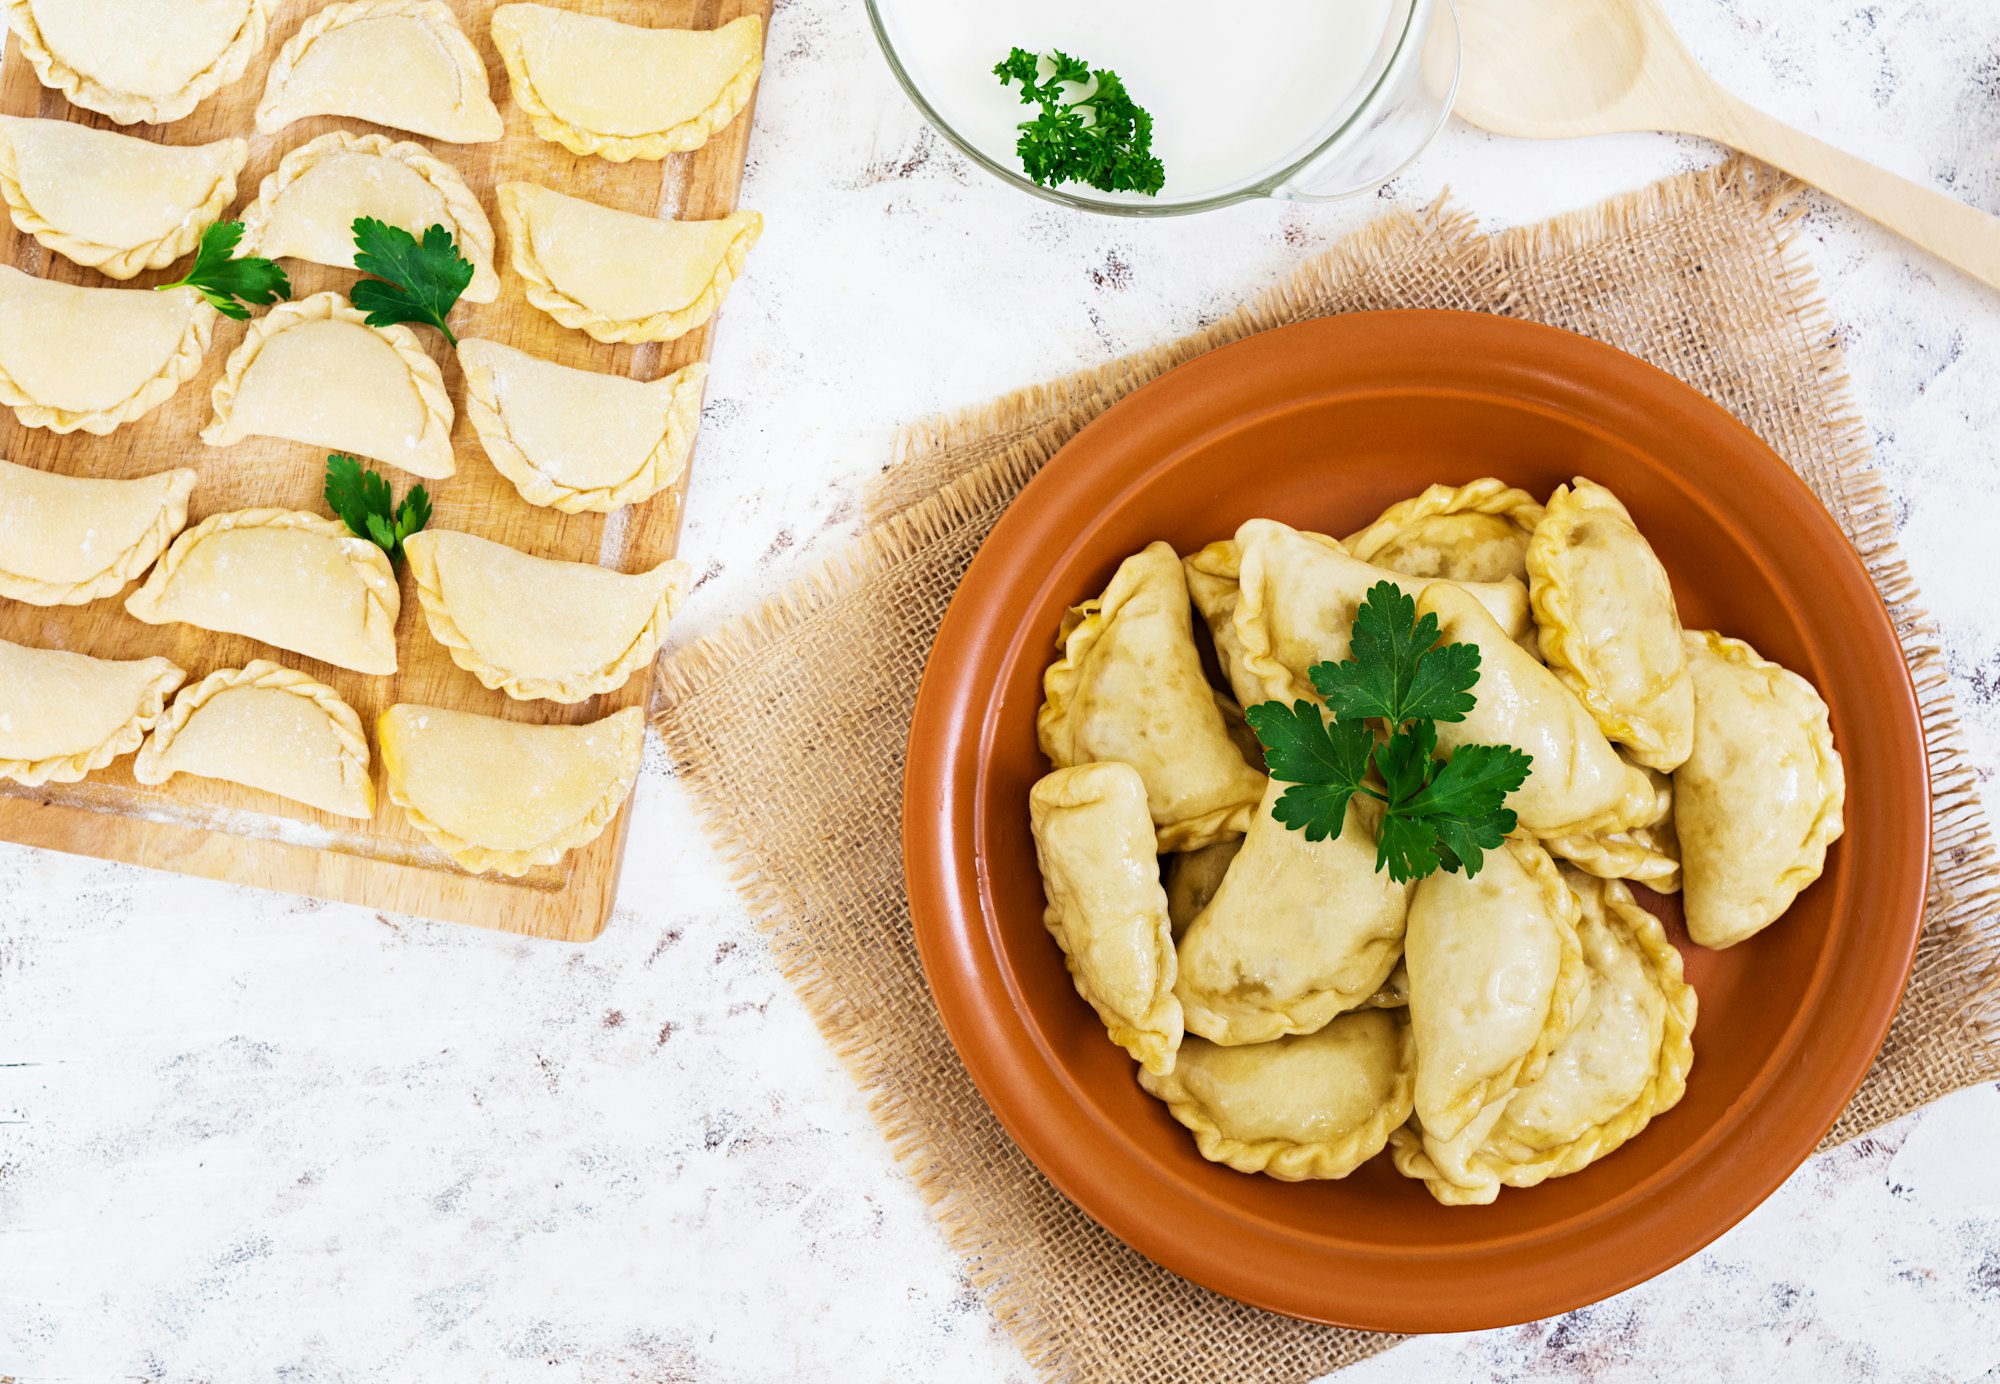 Delicious dumplings with cabbage on white background. Top view